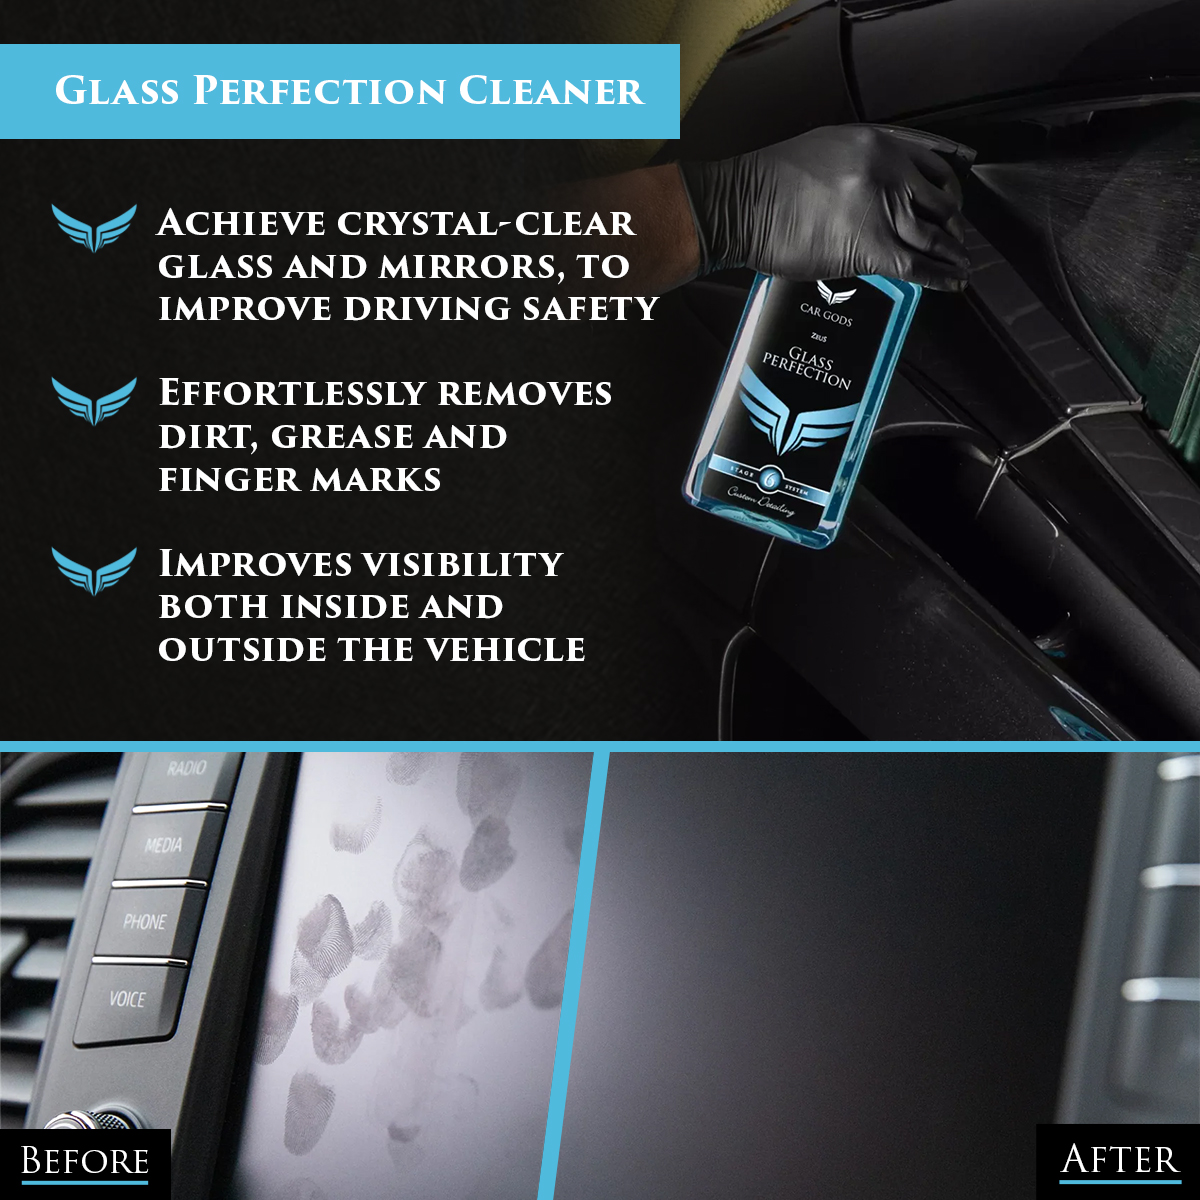 Car Gods Glass Perfection is a high performance glass cleaner that helps you effortlessly remove dirt, grease, grime and finger marks from your car’s glass. The quick-drying, solvent-free formula ensures a streak free finish, improving visibility both inside and outside the vehicle to improve driving safety.